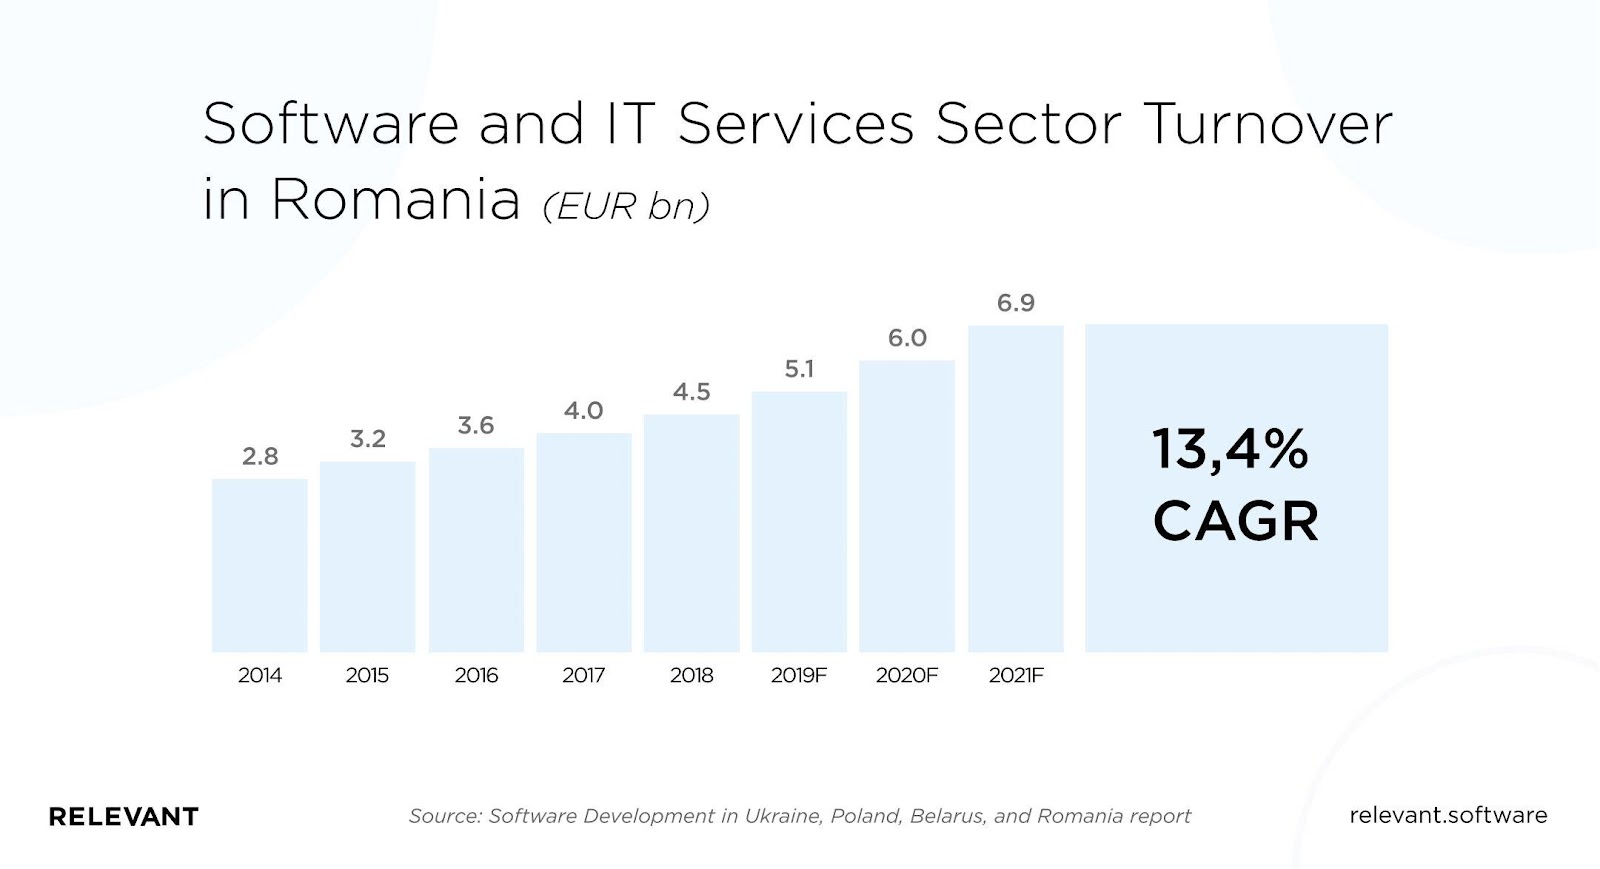 Roweb – the Romanian software company with most of its clients in UK –  registered over 4.5. million euros revenues in 2021